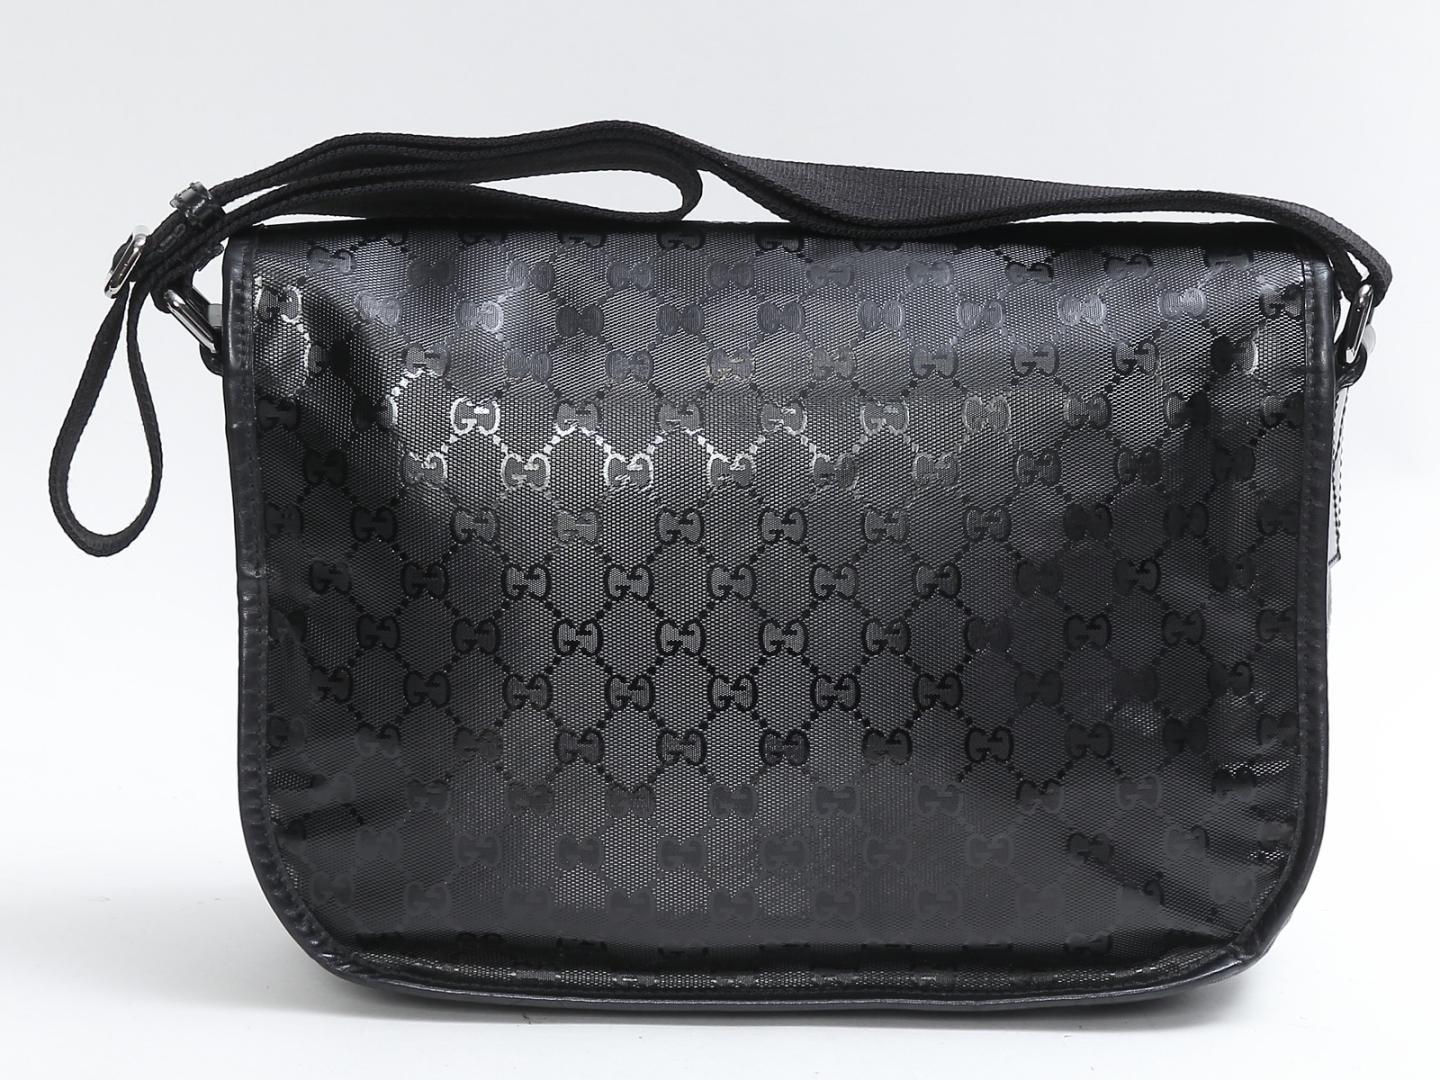 This Gucci messenger bag is made of of Gucci monogram imprime textile. The bag features black leather trim, a black nylon adjustable cross body strap and polished dark silver hardware. The buckle closure on the front flap opens to a Gucci emblem